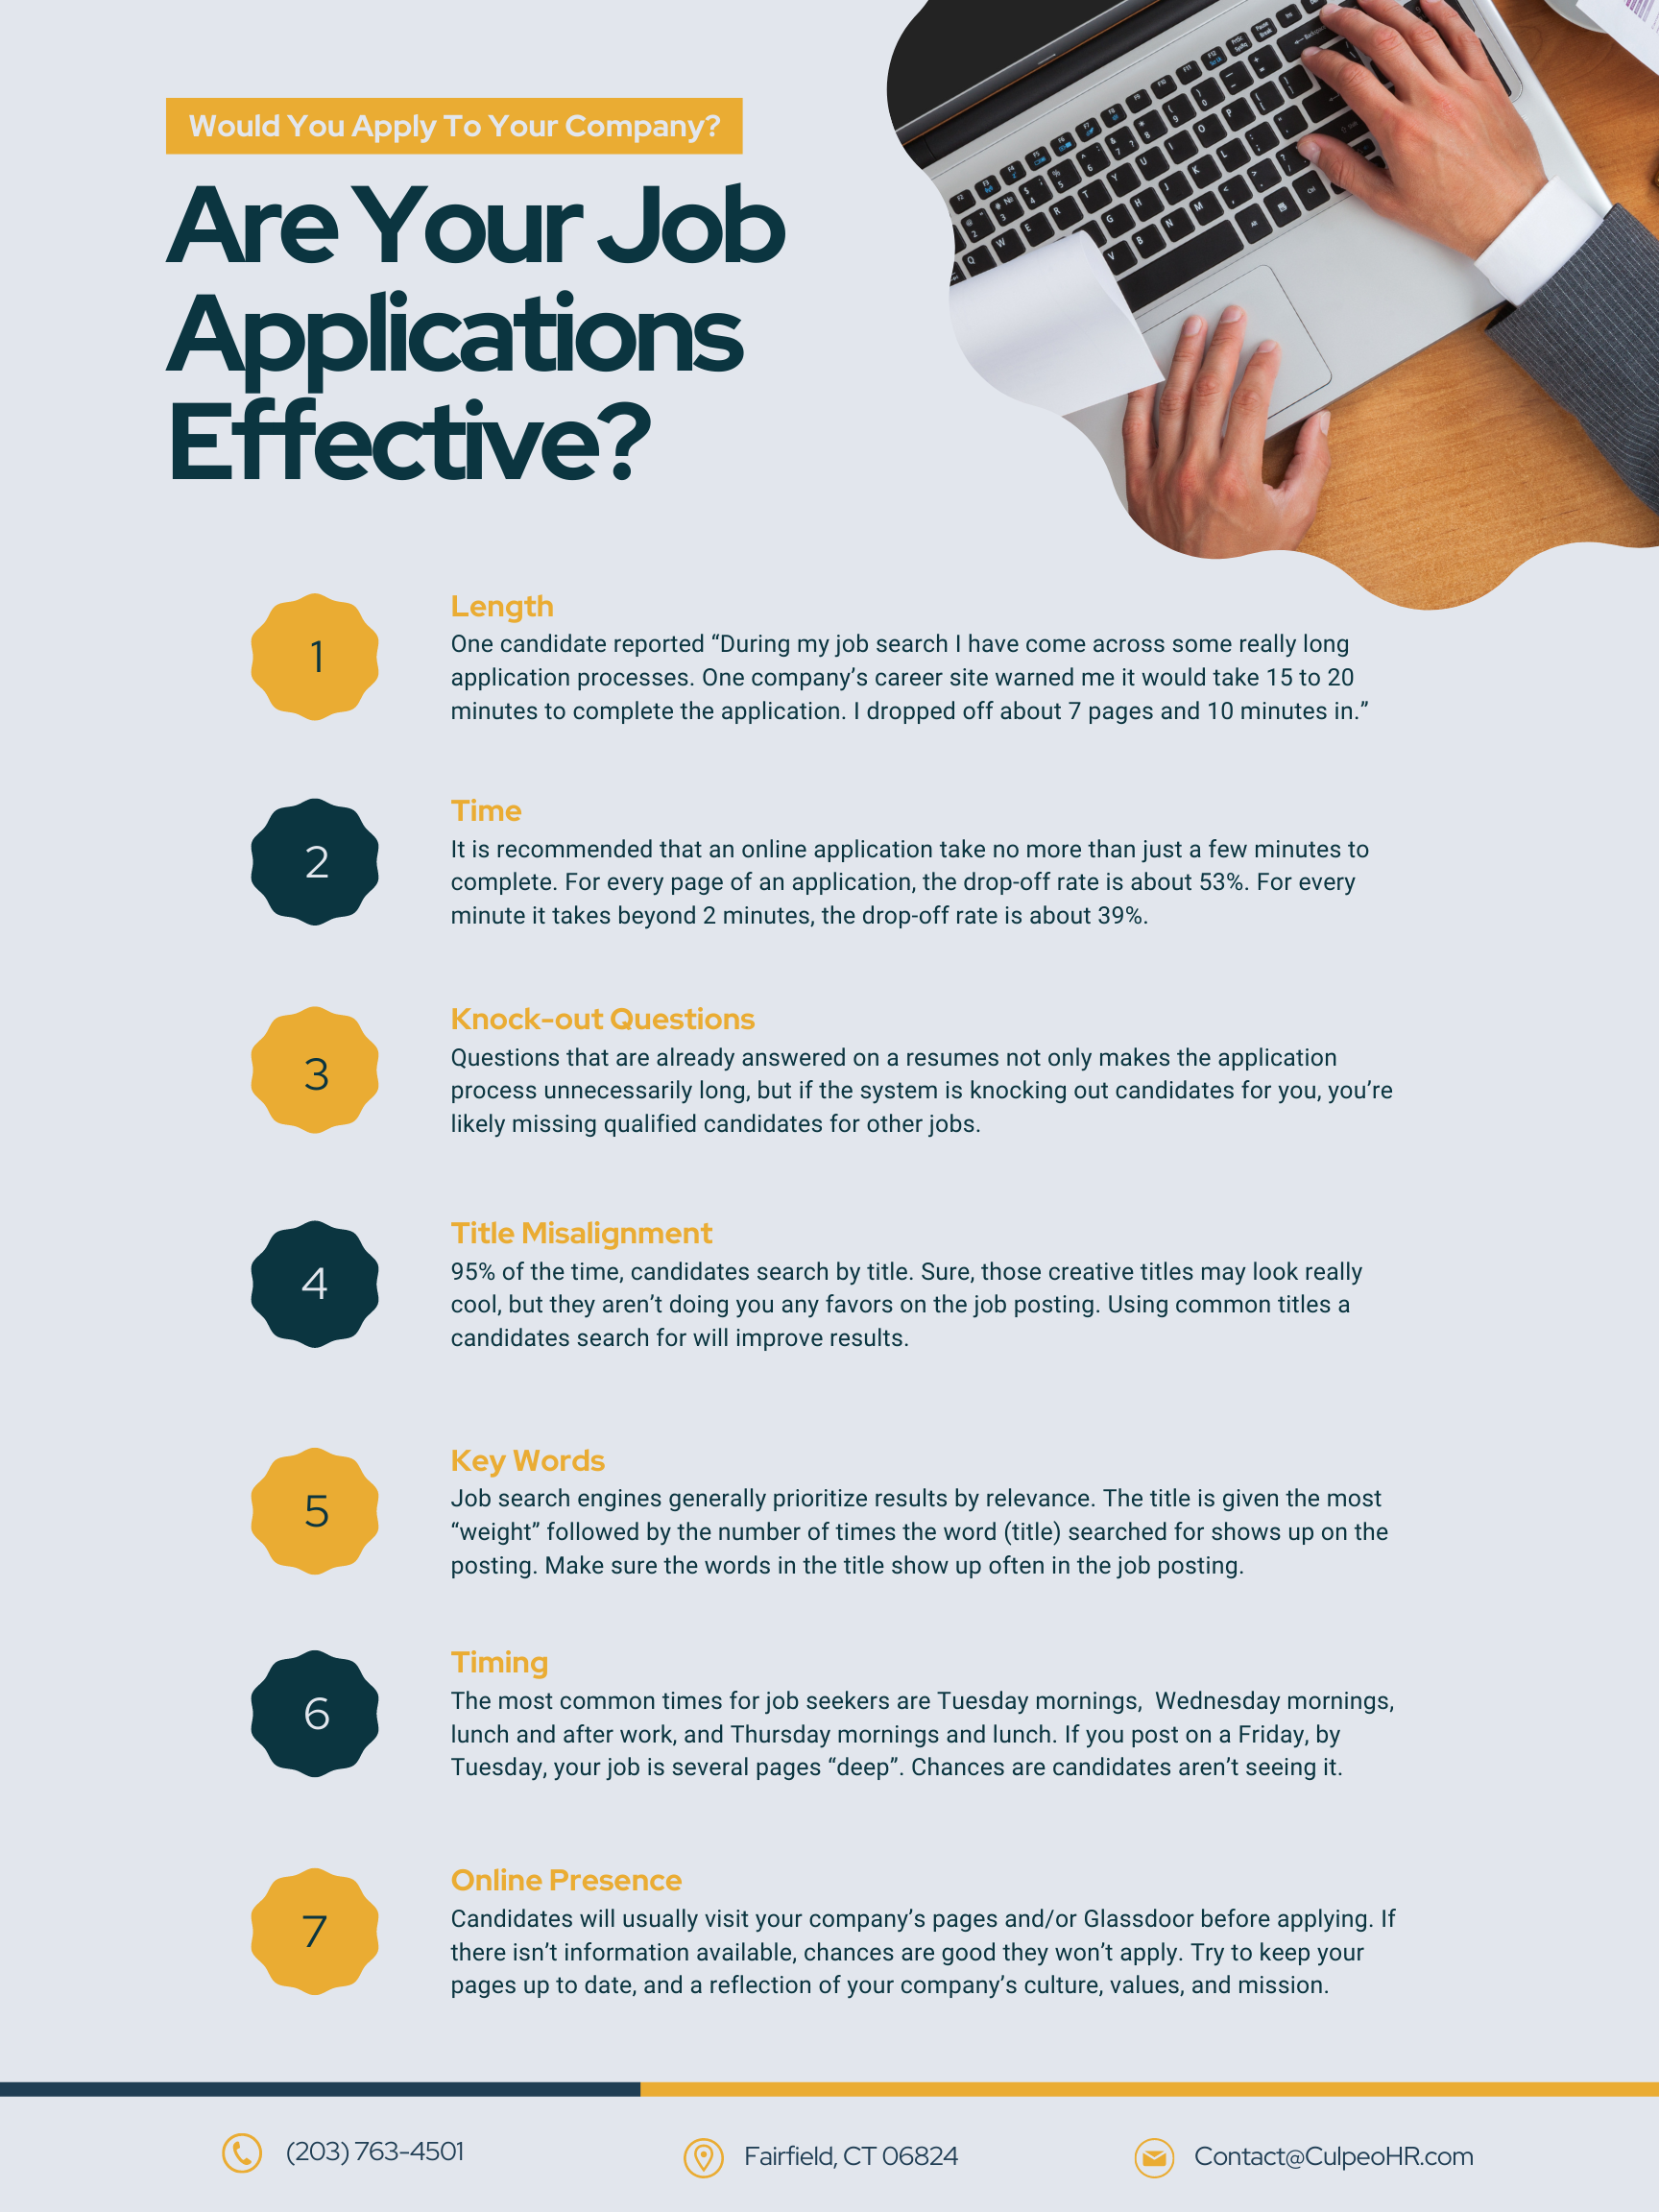 Are Your Job Applications Effective